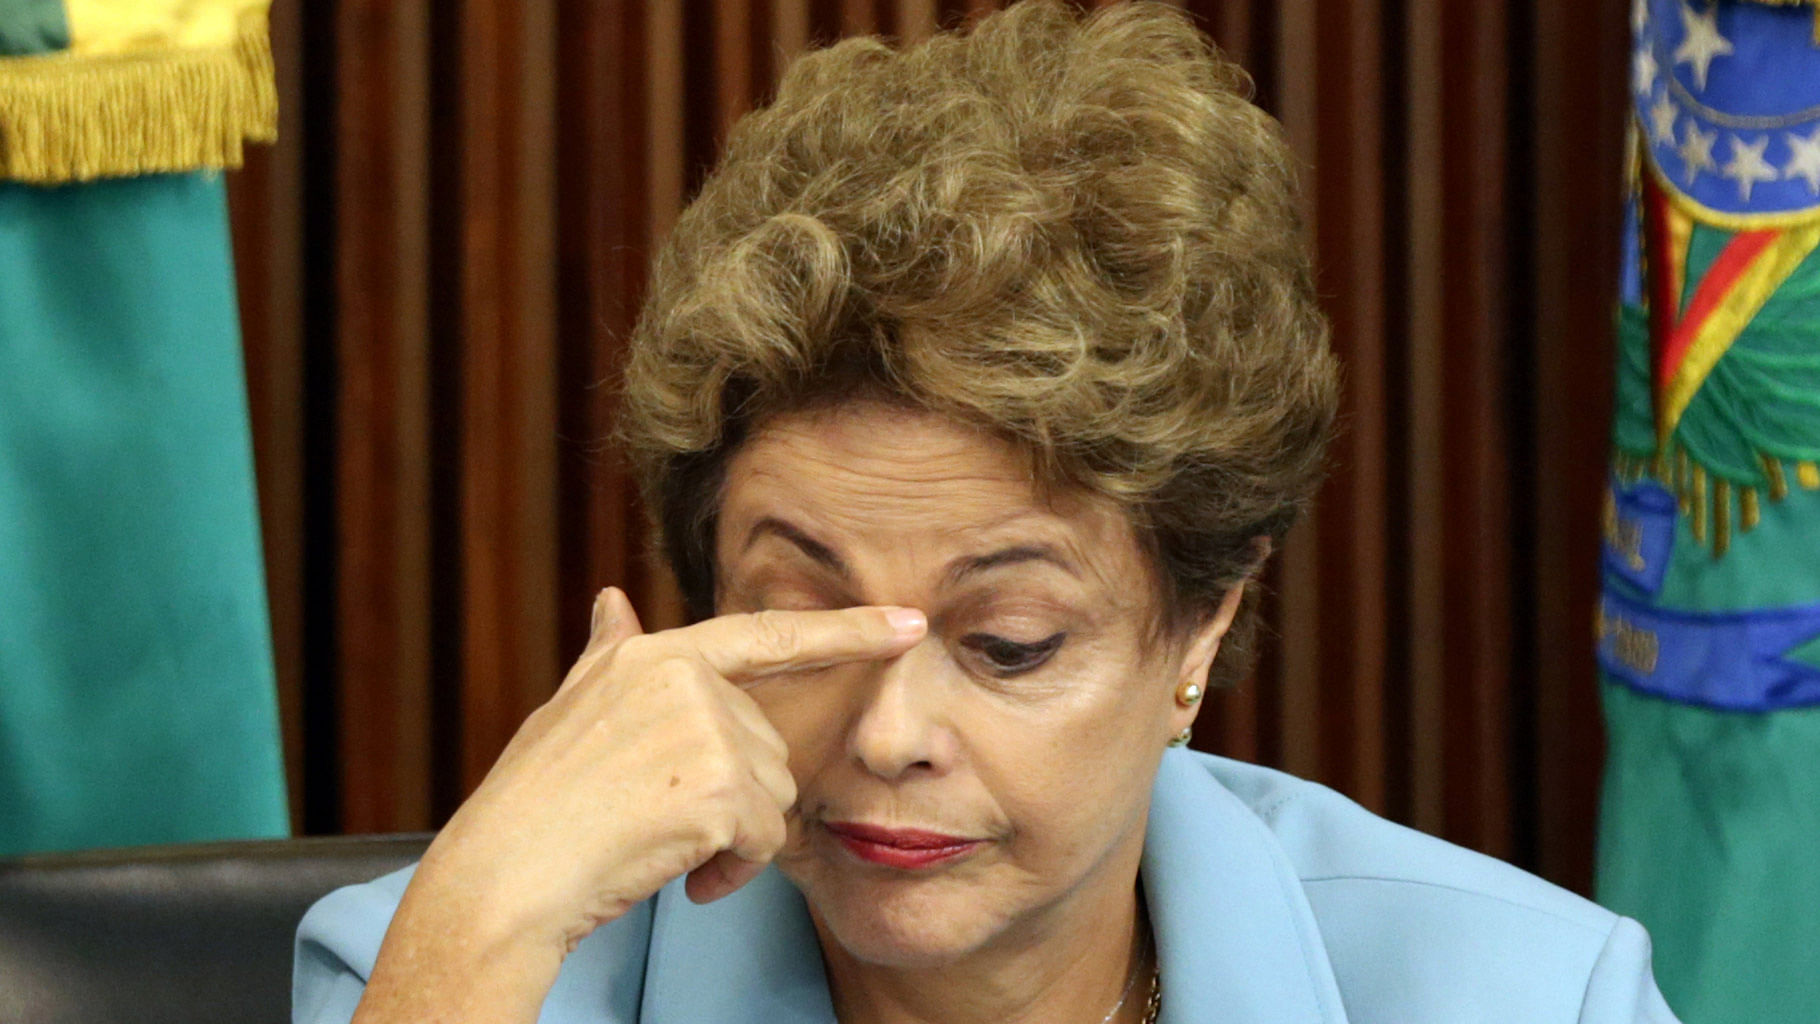 Brazil’s President Dilma Rousseff at a meeting with state governors regarding the impeachment process on December 8, 2015. (Photo: AP)